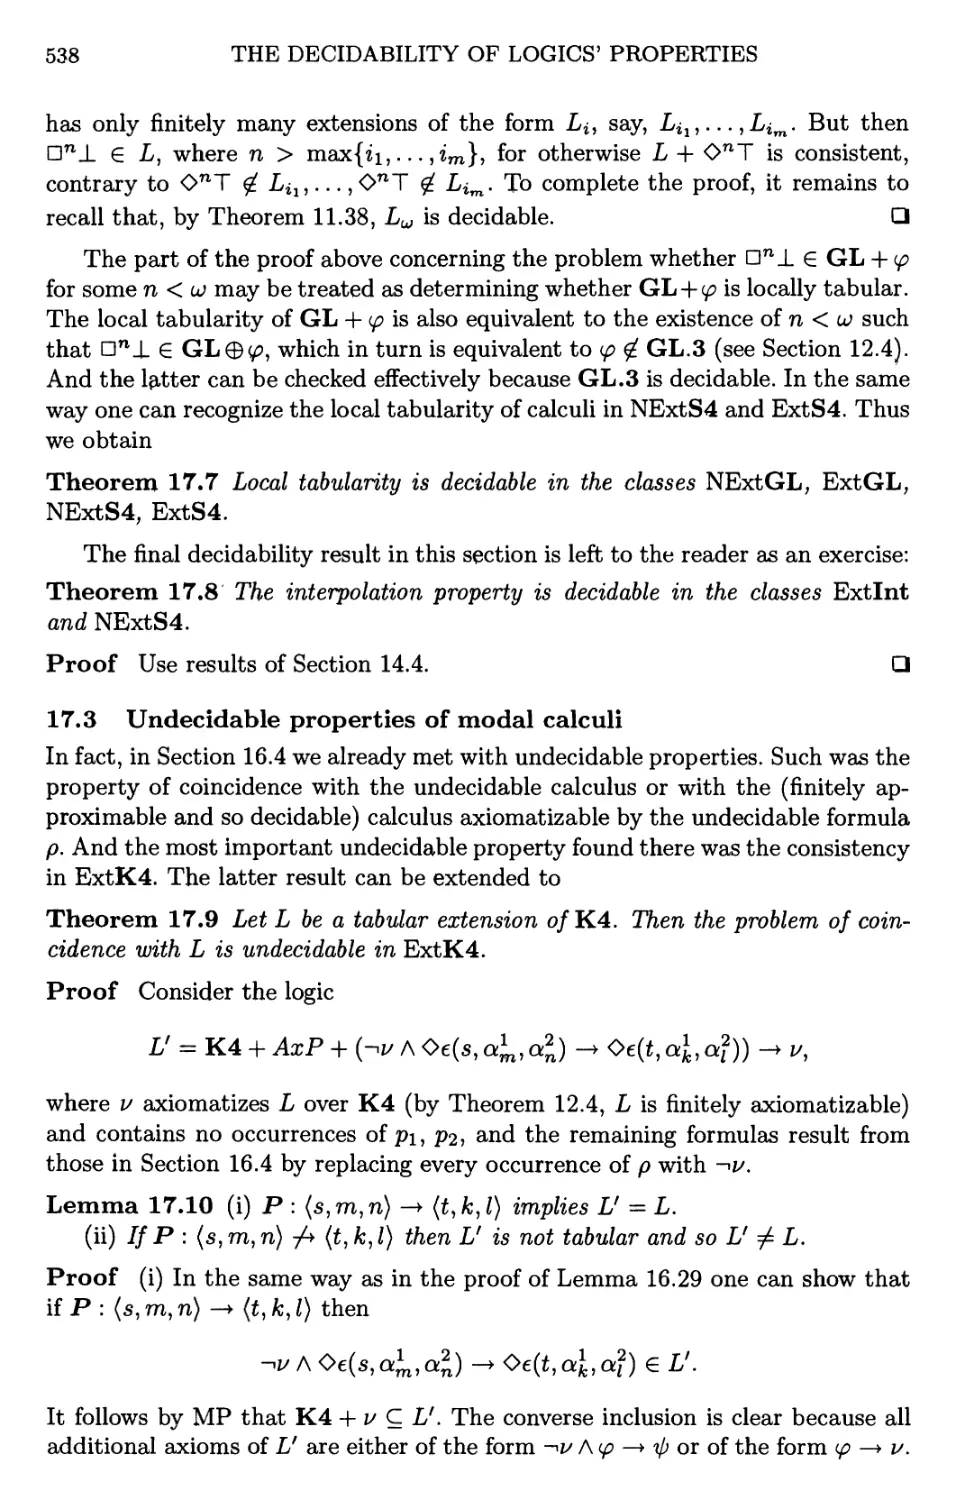 17.3 Undecidable properties of modal calculi